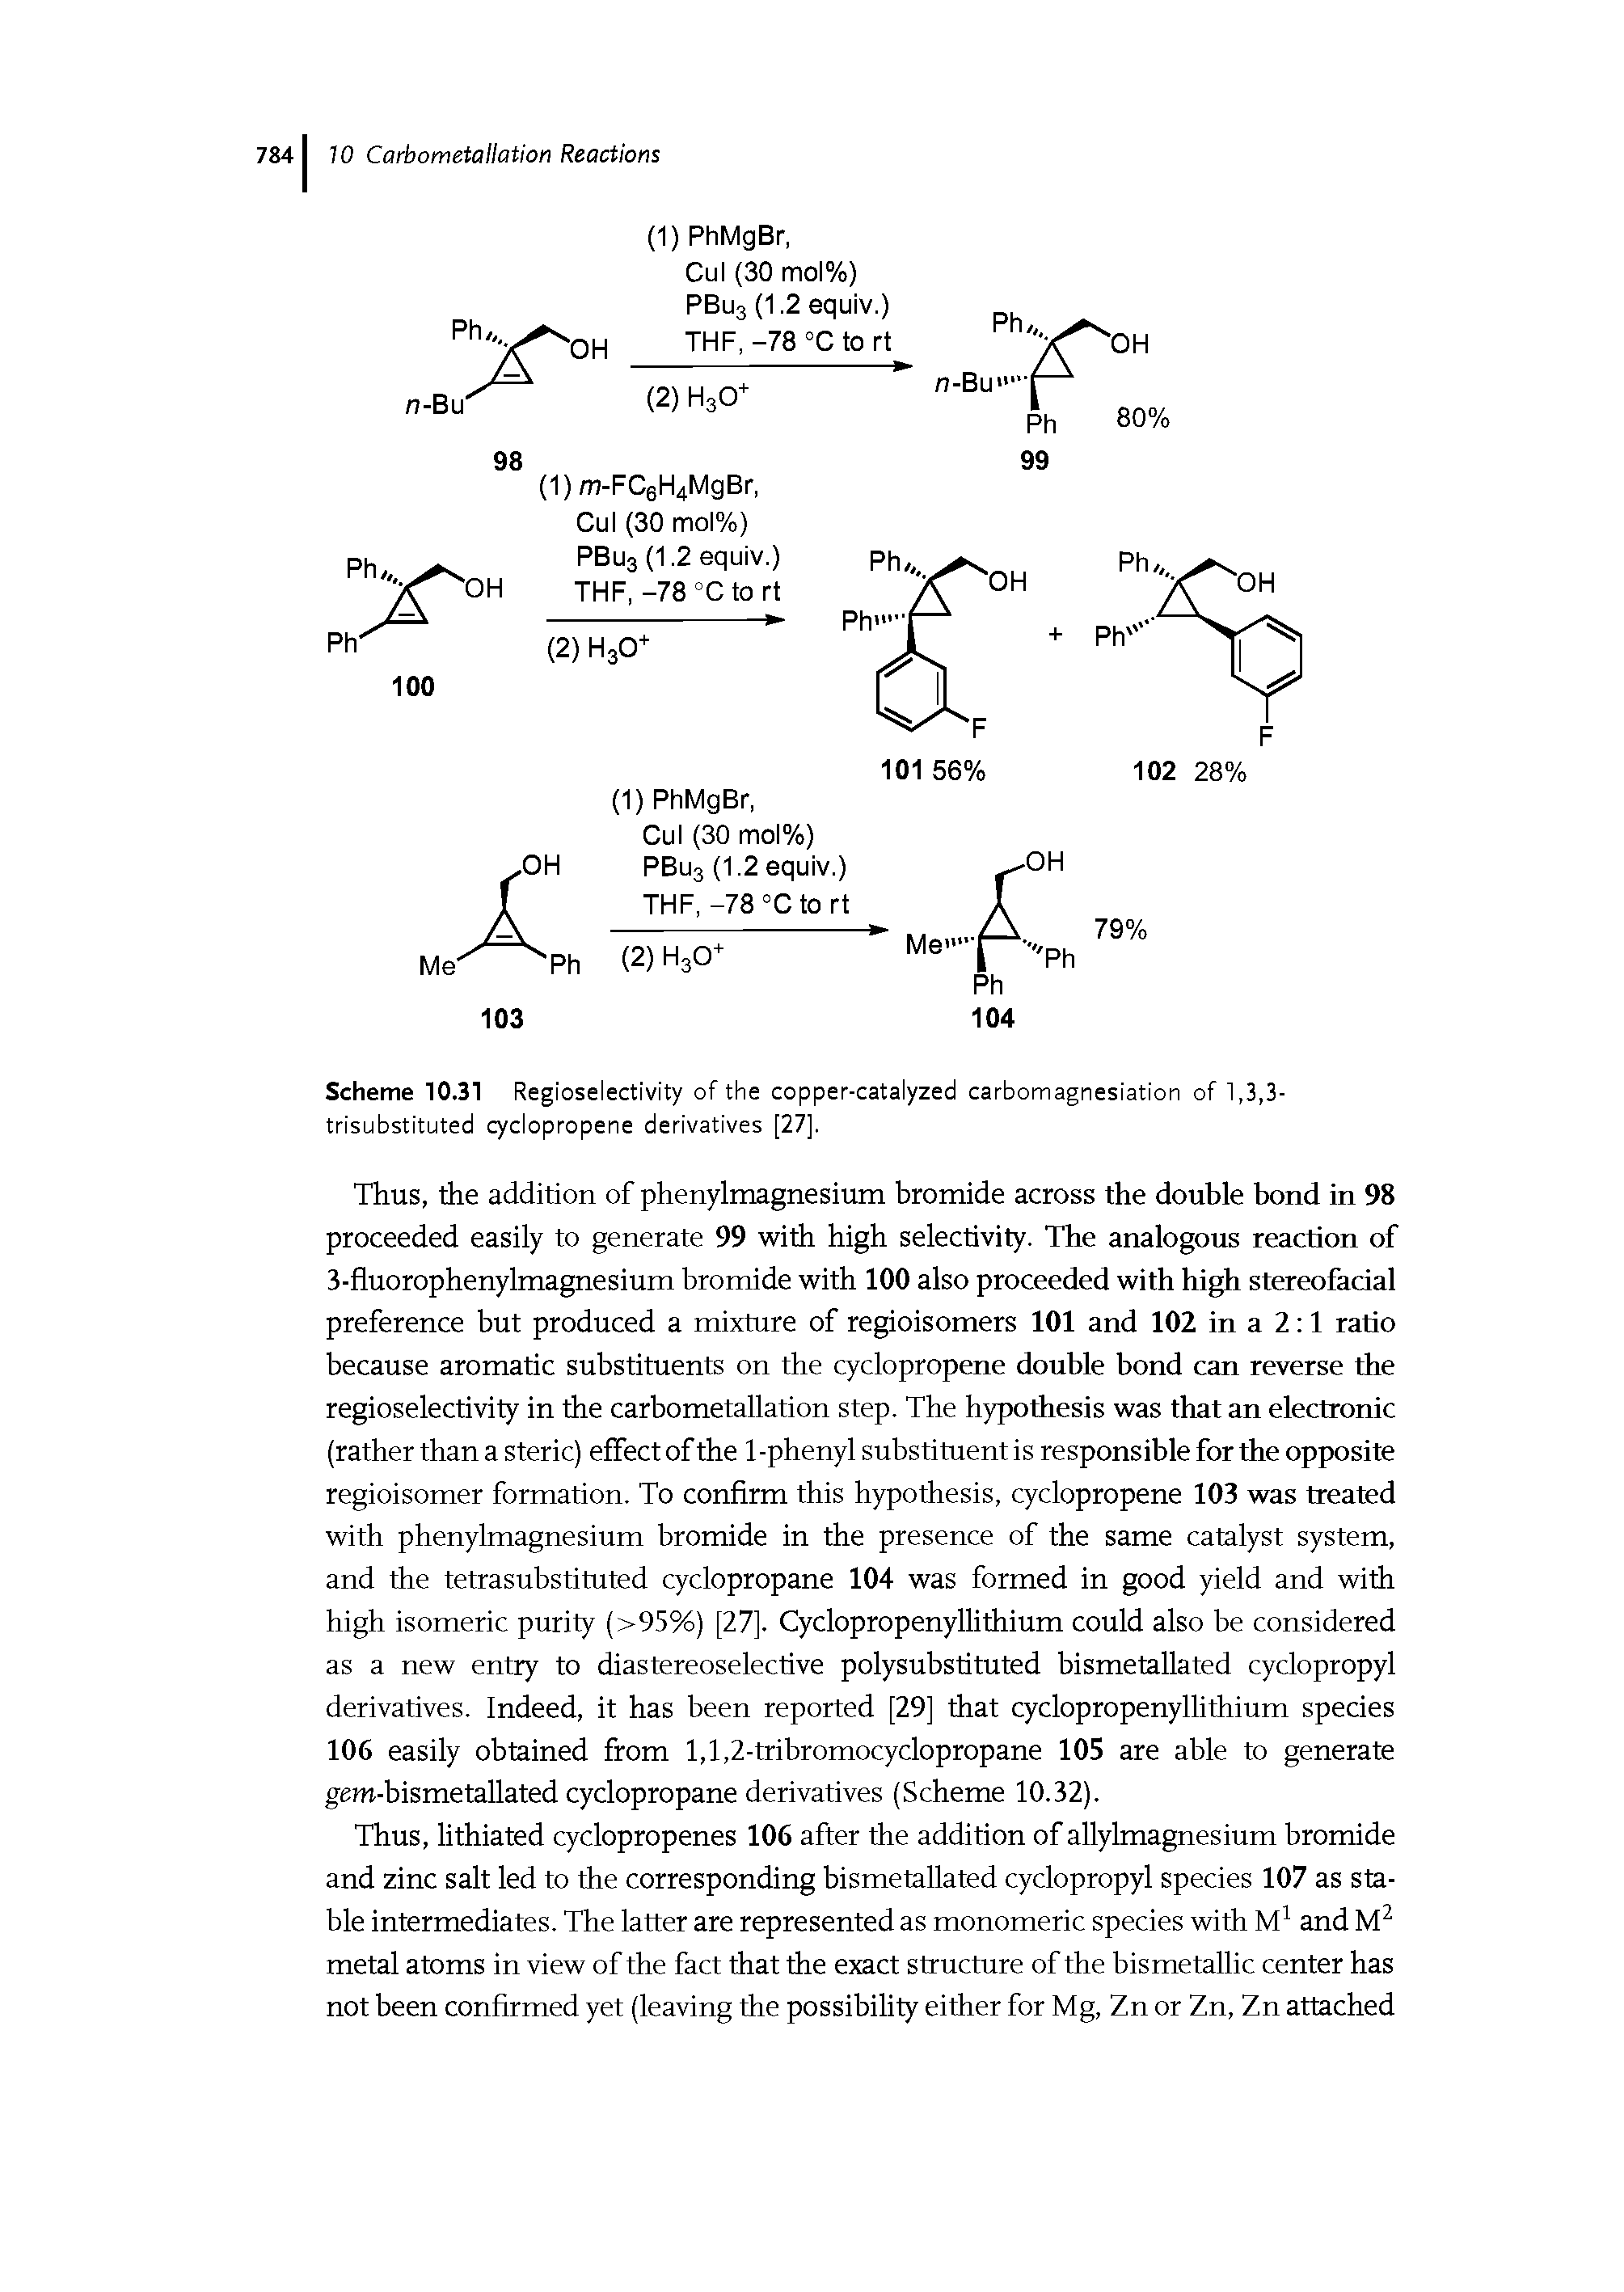 Scheme 10.31 Regioselectivity of the copper-catalyzed carbomagnesiation of 1,3,3-trisubstituted cyclopropene derivatives [27].